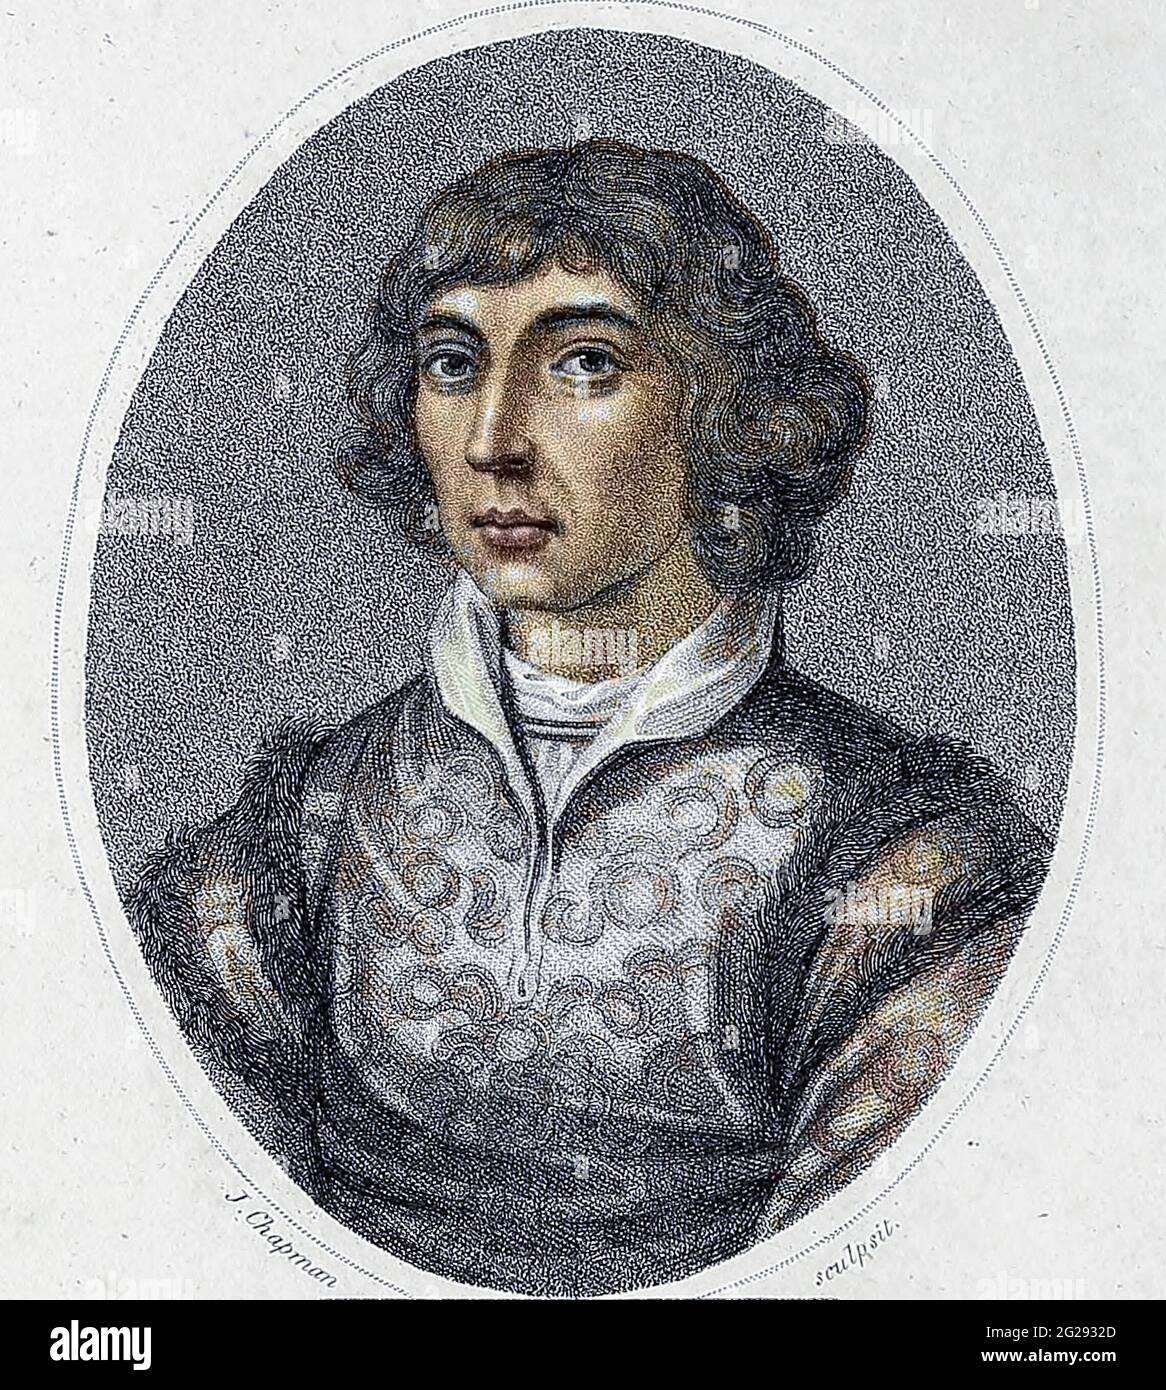 Nicolaus Copernicus (Polish: Mikołaj Kopernik; German: Niclas Koppernigk, modern: Nikolaus Kopernikus; 19 February 1473 – 24 May 1543) was a Renaissance-era mathematician, astronomer, and Catholic canon who formulated a model of the universe that placed the Sun rather than Earth at its center. In all likelihood, Copernicus developed his model independently of Aristarchus of Samos, an ancient Greek astronomer who had formulated such a model some eighteen centuries earlier Copperplate engraving From the Encyclopaedia Londinensis or, Universal dictionary of arts, sciences, and literature; Volume Stock Photo